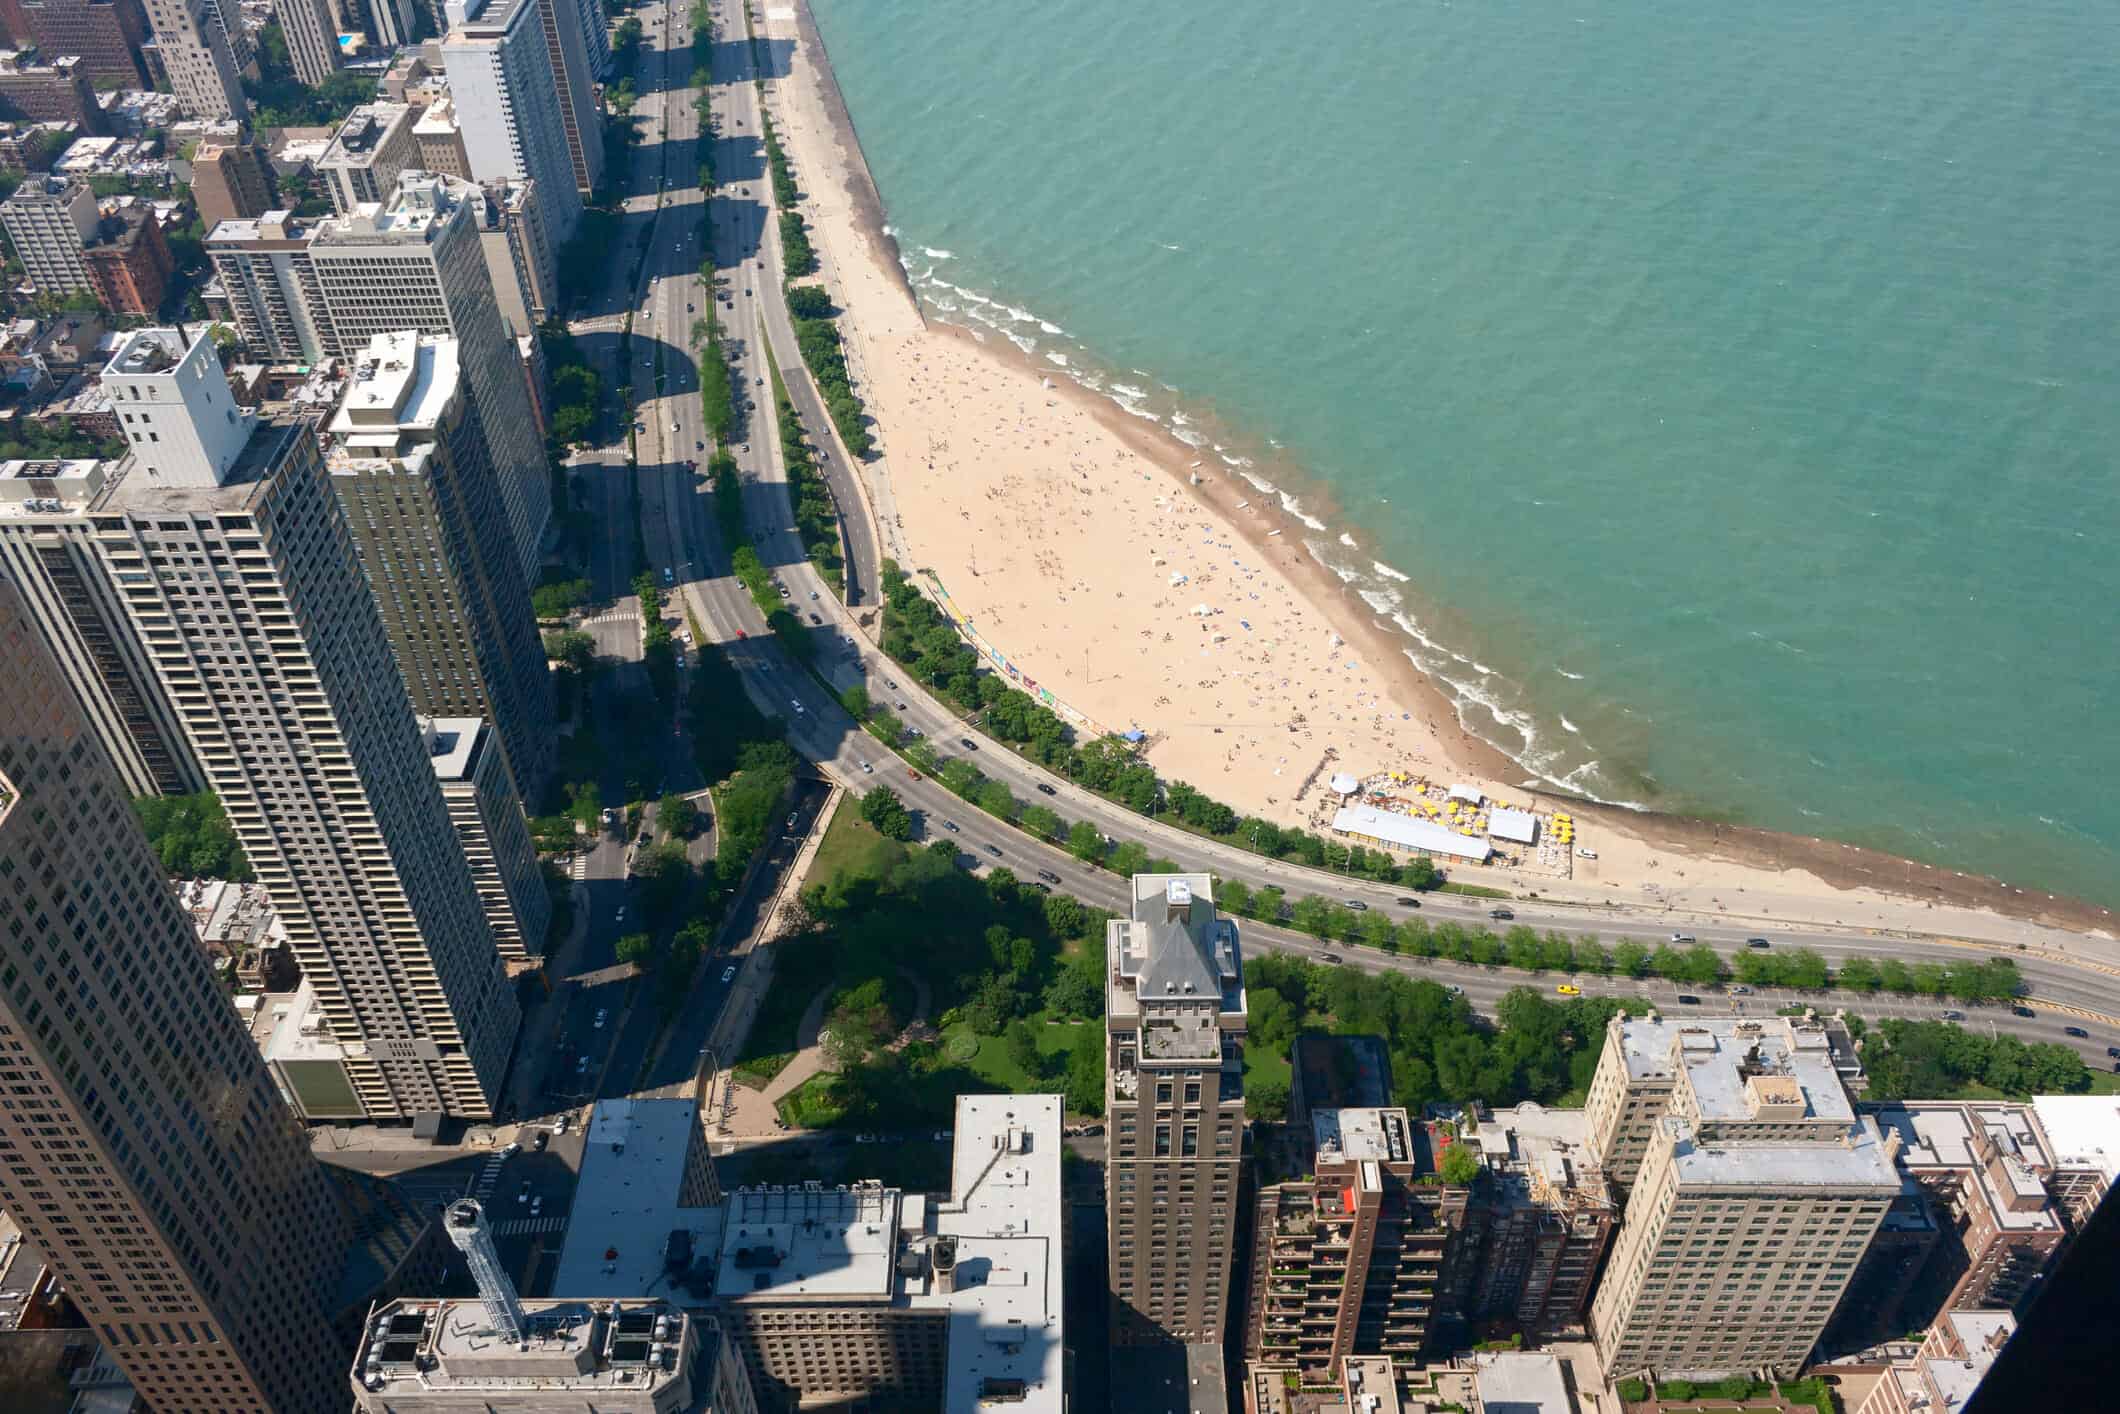 Lake Shore Drive Condos For Sale - Apartments - Best Chicago Properties